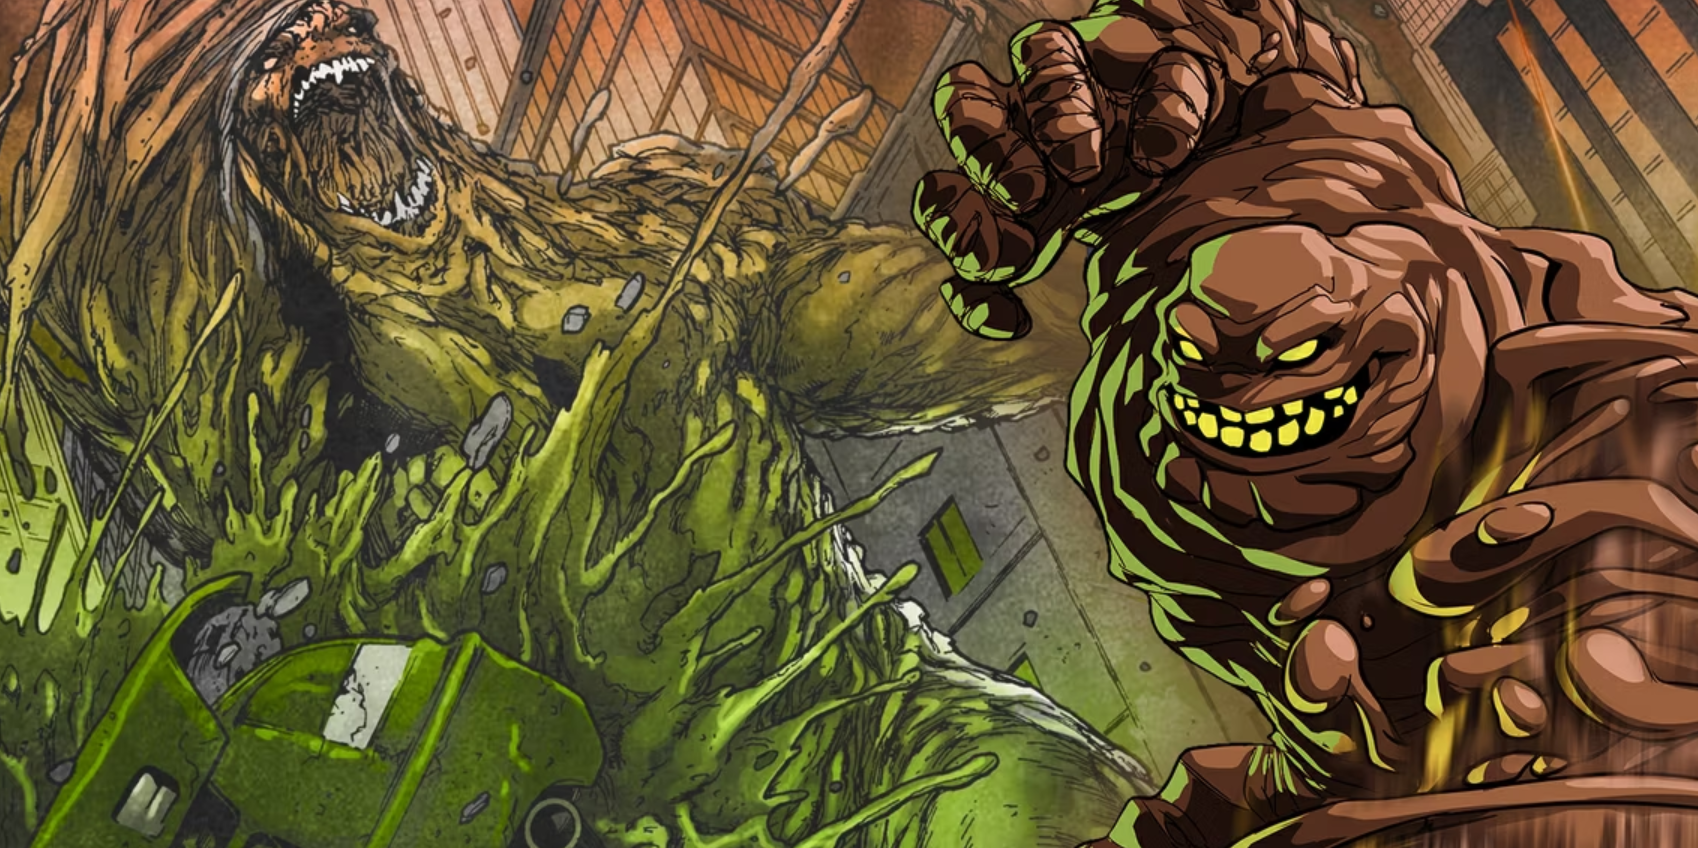 Batman's Clayface Has a Strange History With Gaining Alternate Powers -  Daily Superheroes - Your daily dose of Superheroes news